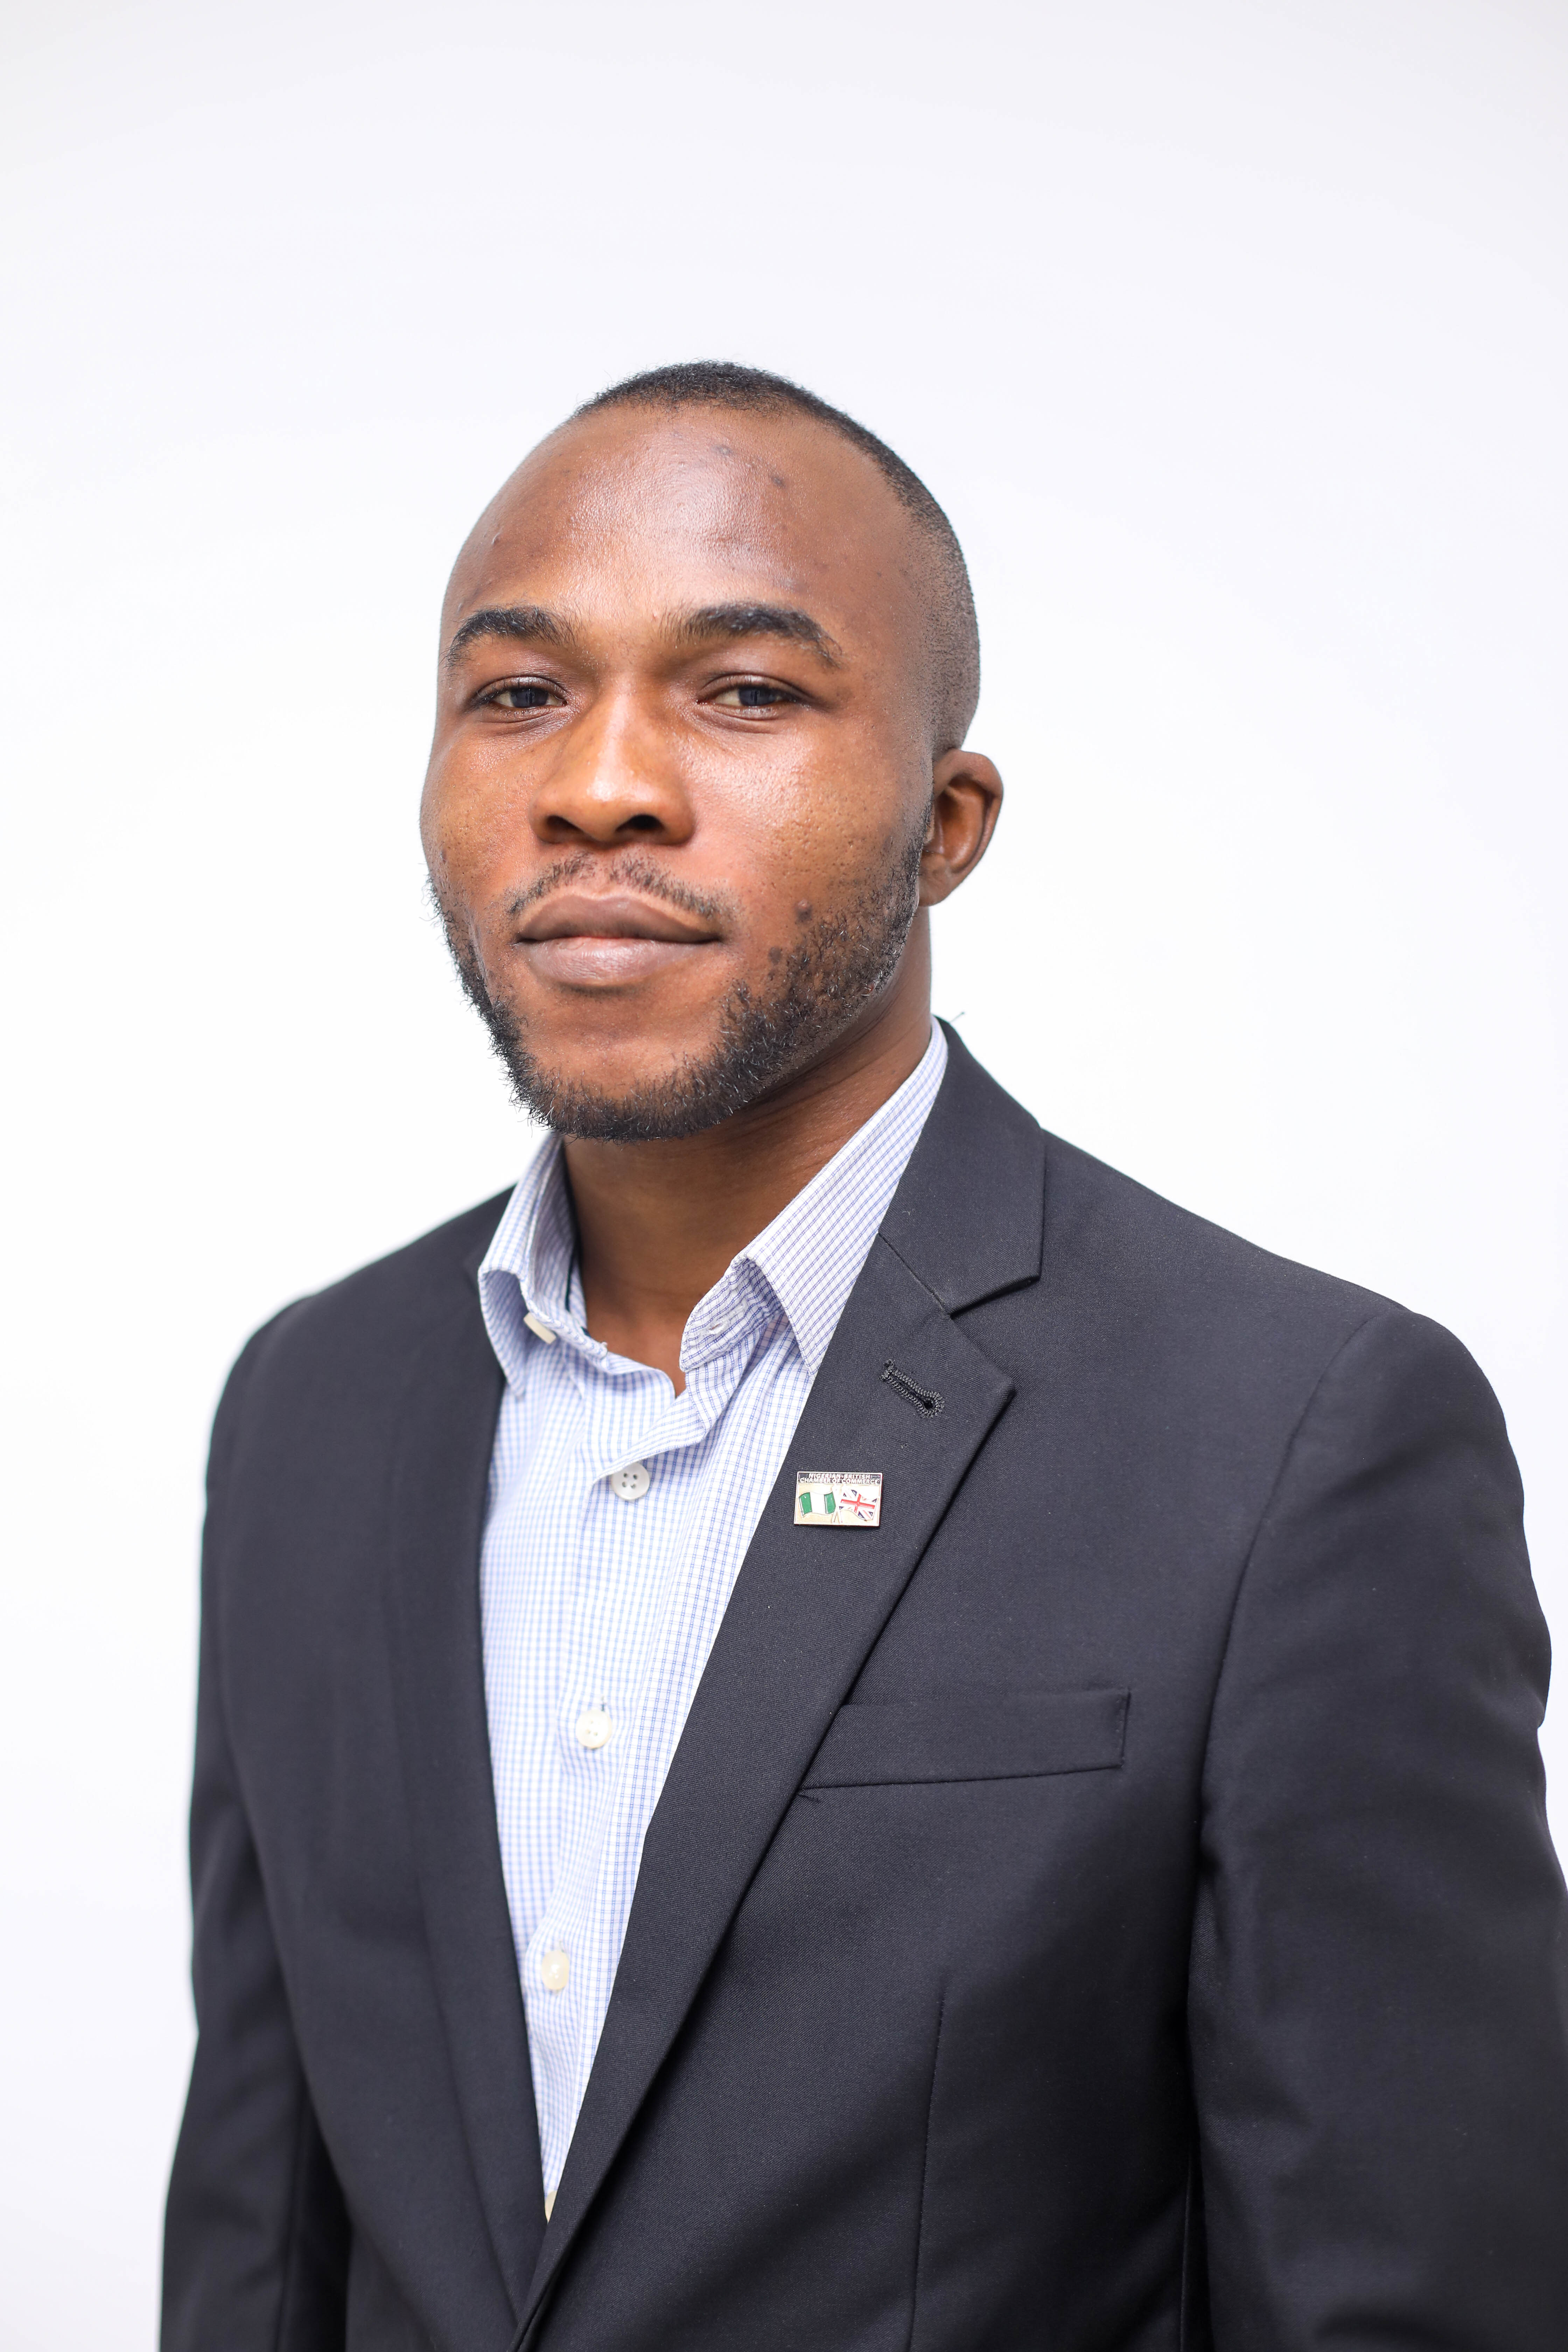 NBCC
                    Our Team - Samuel Babatunde,
                    Account Officer